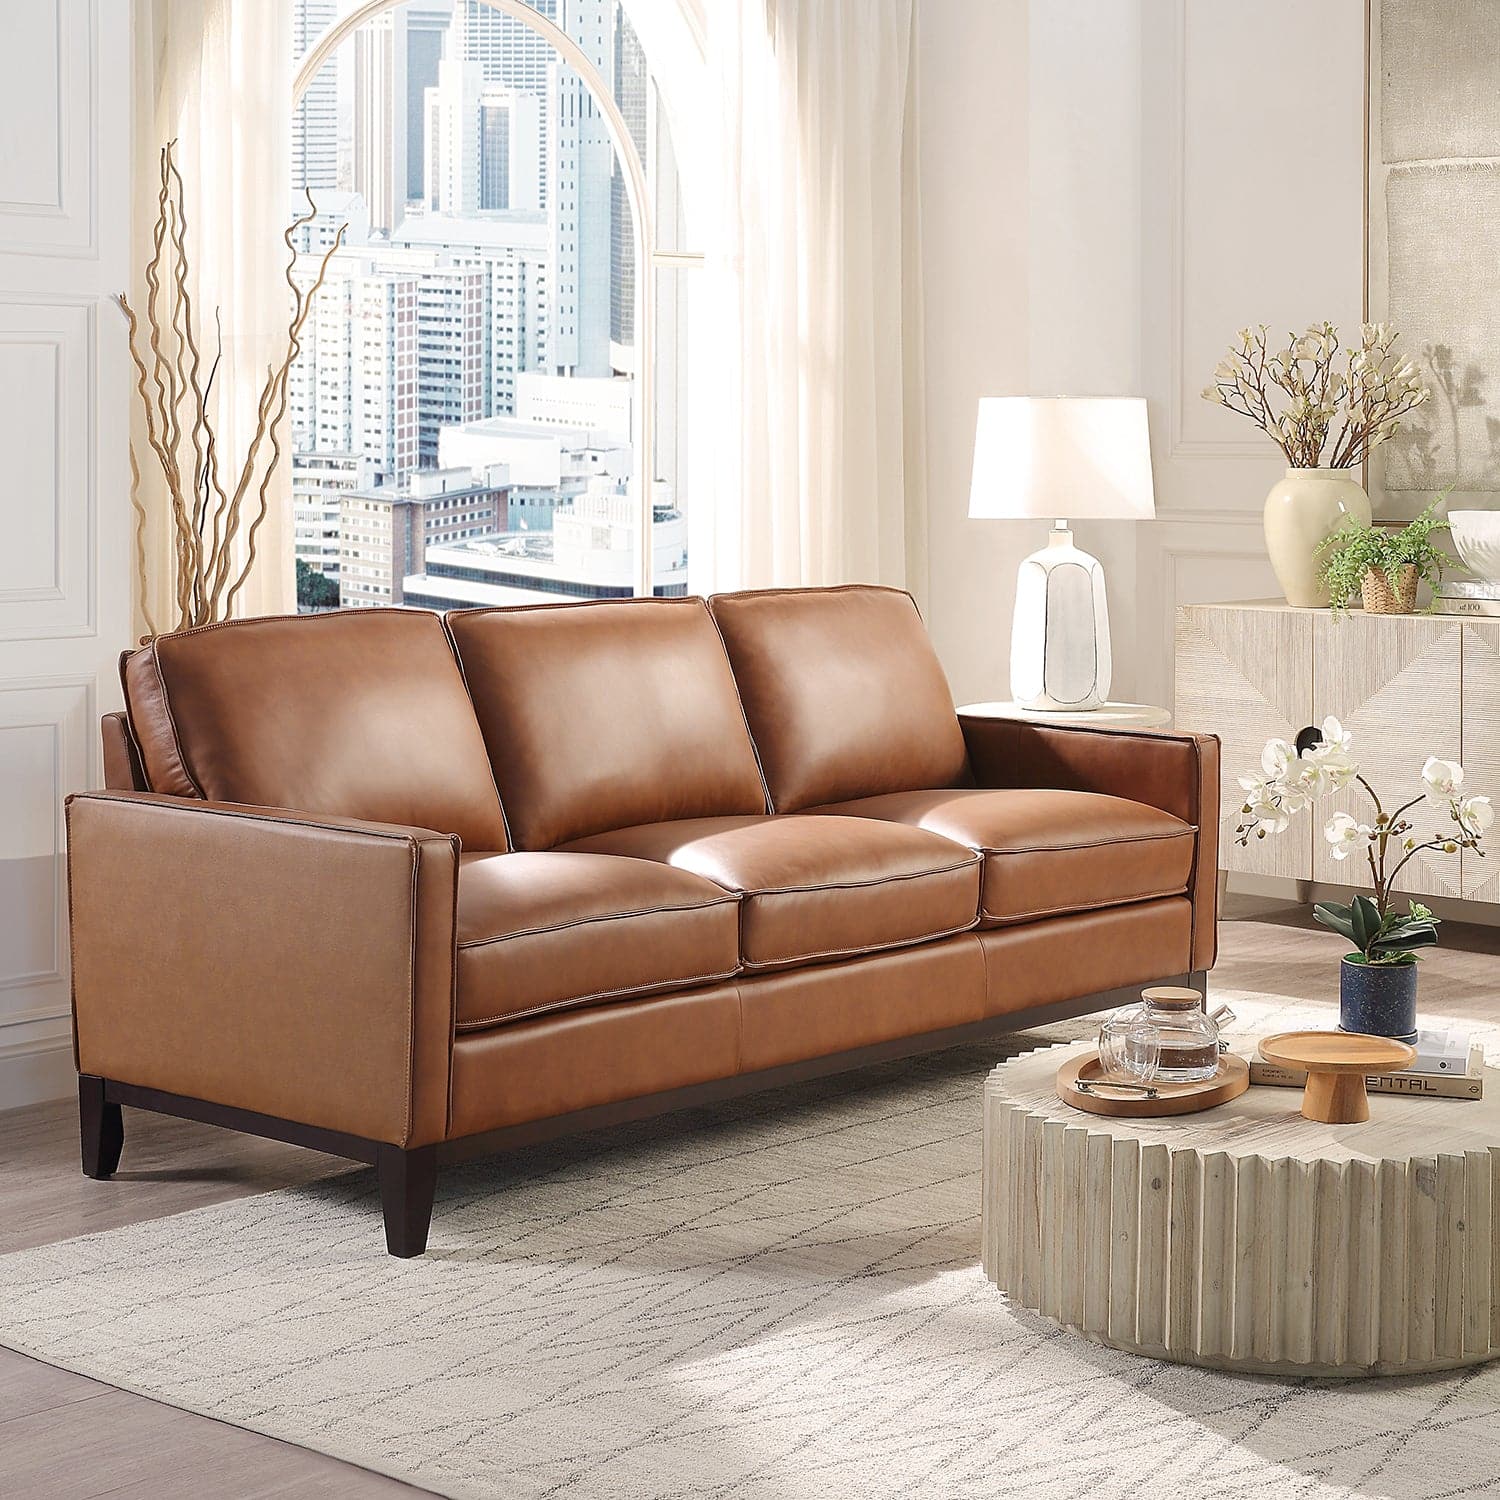 Pimlico Camel Brown Top Grain Leather 3-Seater Sofa with Ottoman